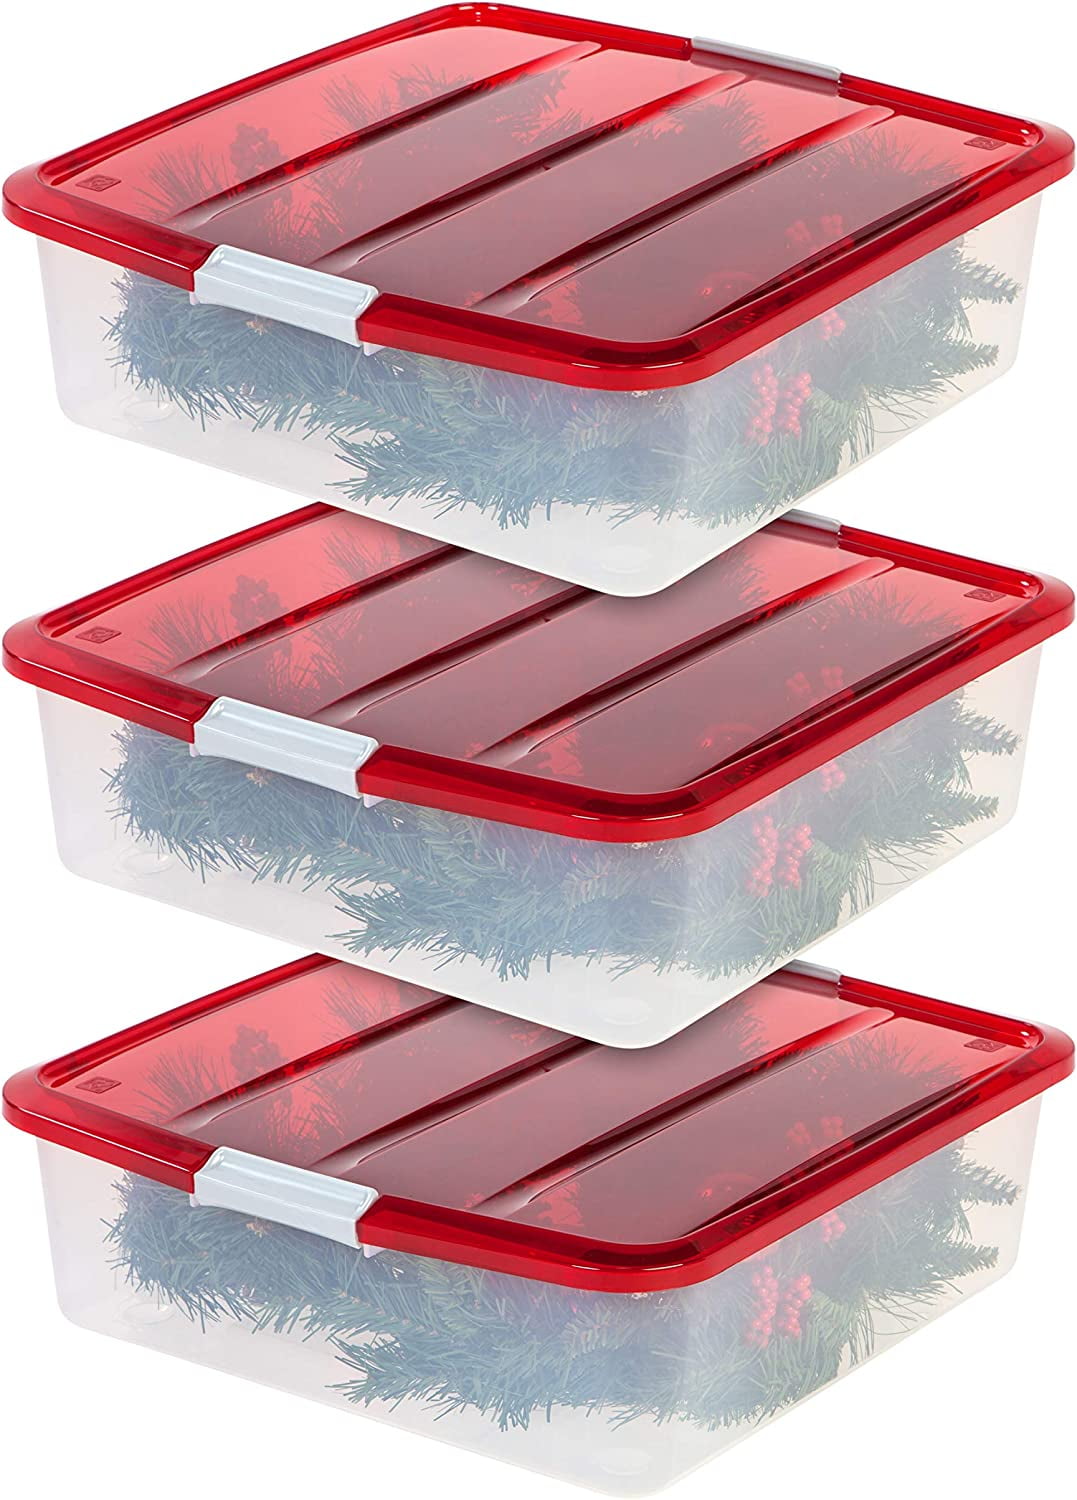 Homz 41QT Clear Plastic Holiday Storage Container with Red Snap Lock Lid, 2 Pk